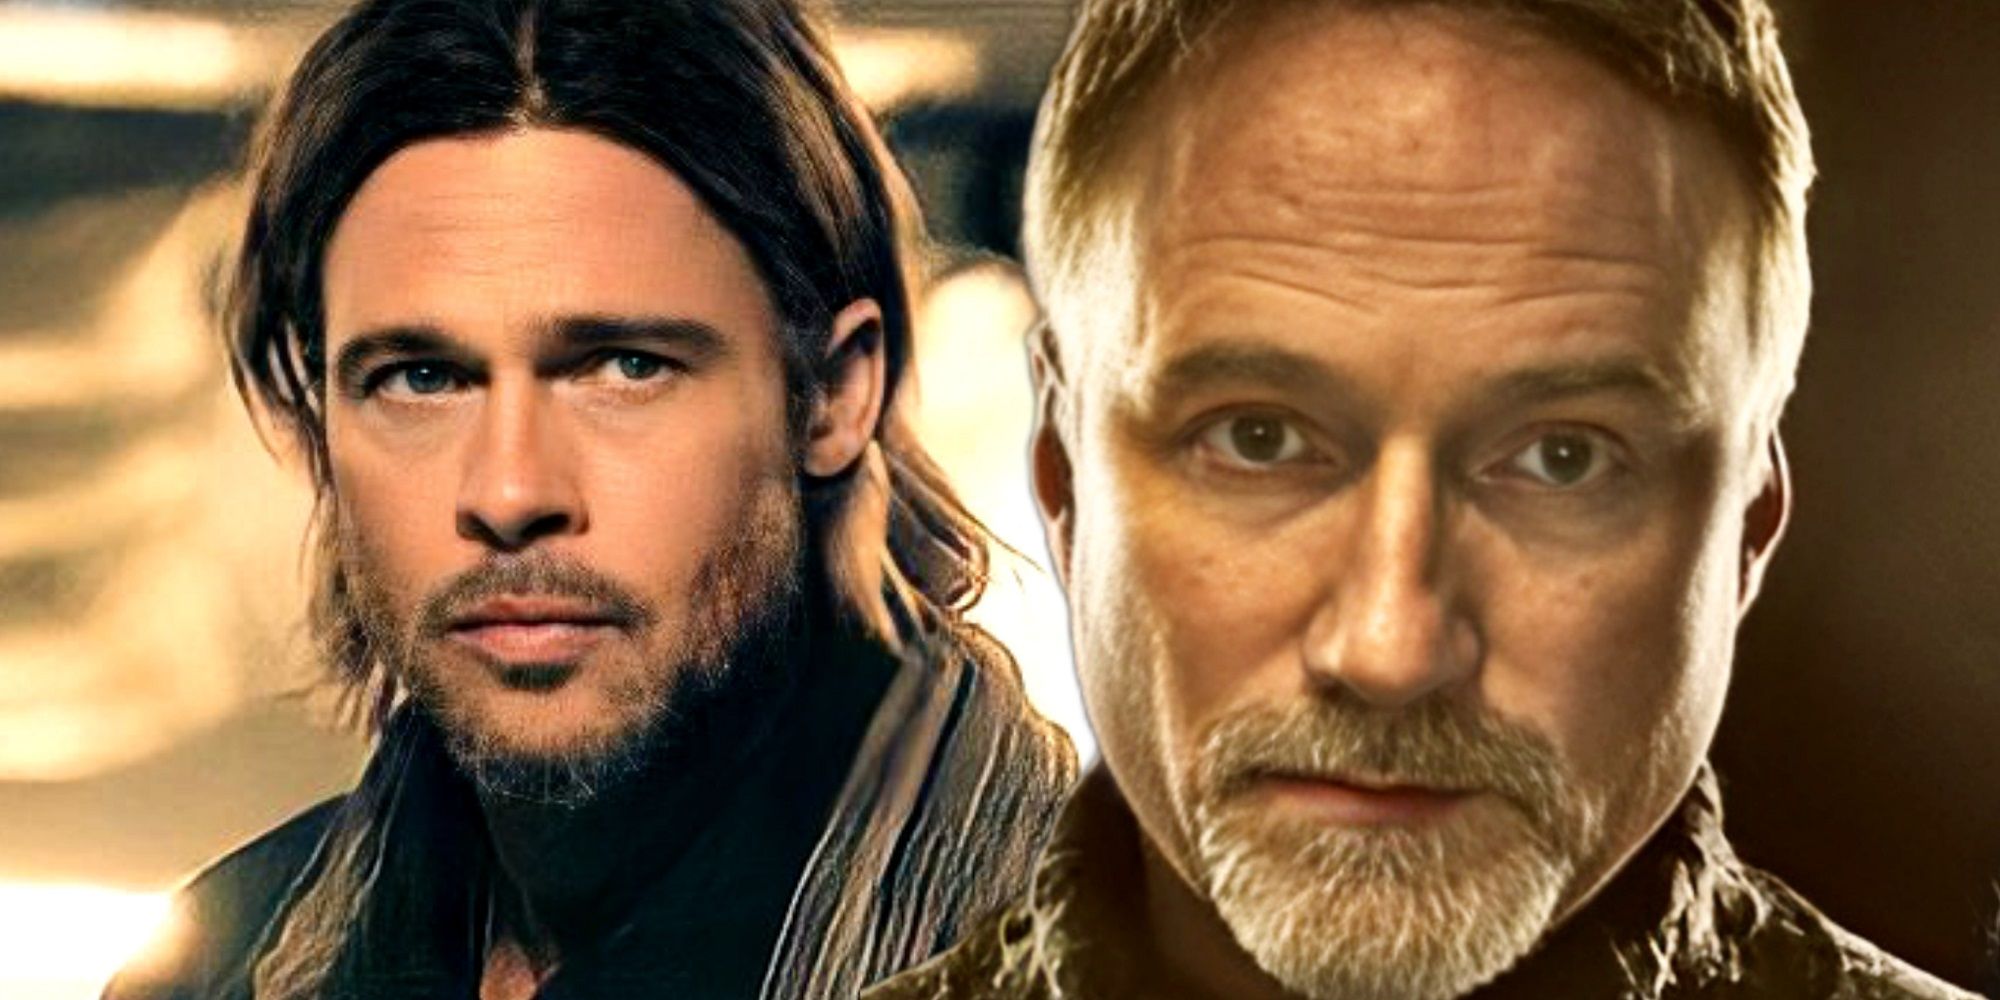 Why It's Good David Fincher's World War Z 2 Never Happened